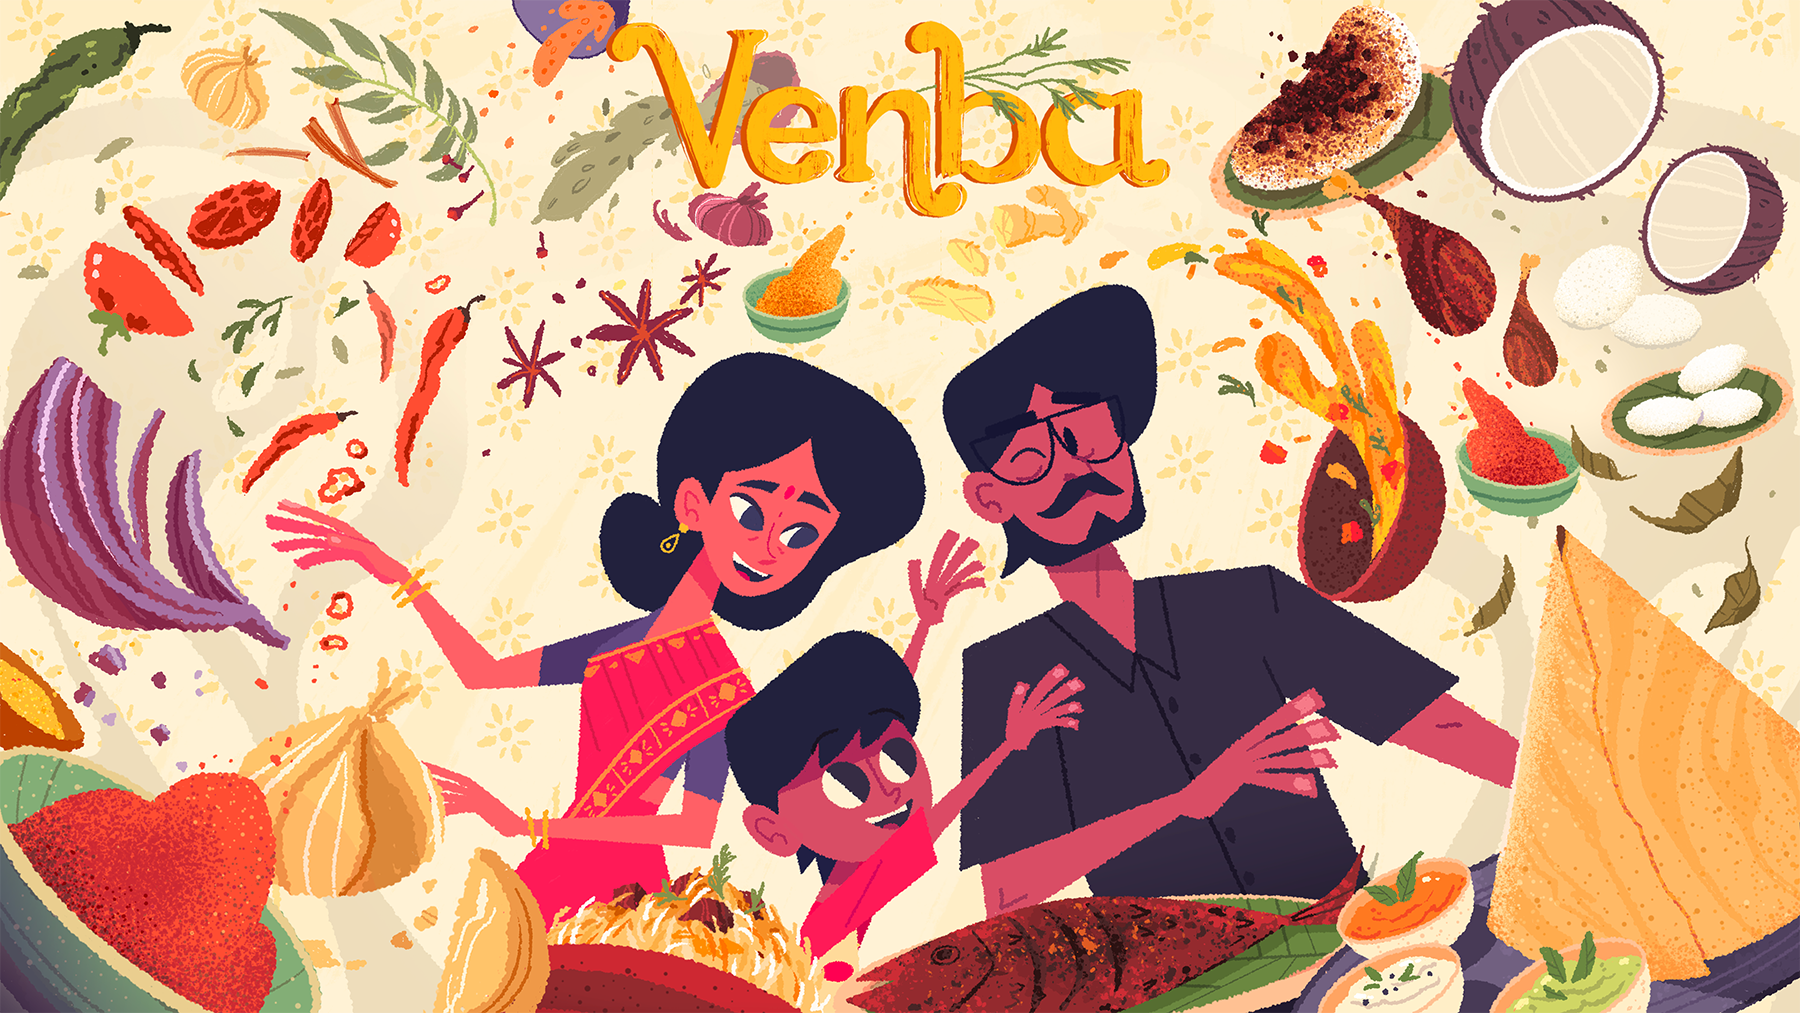 A  promotional image for Venba